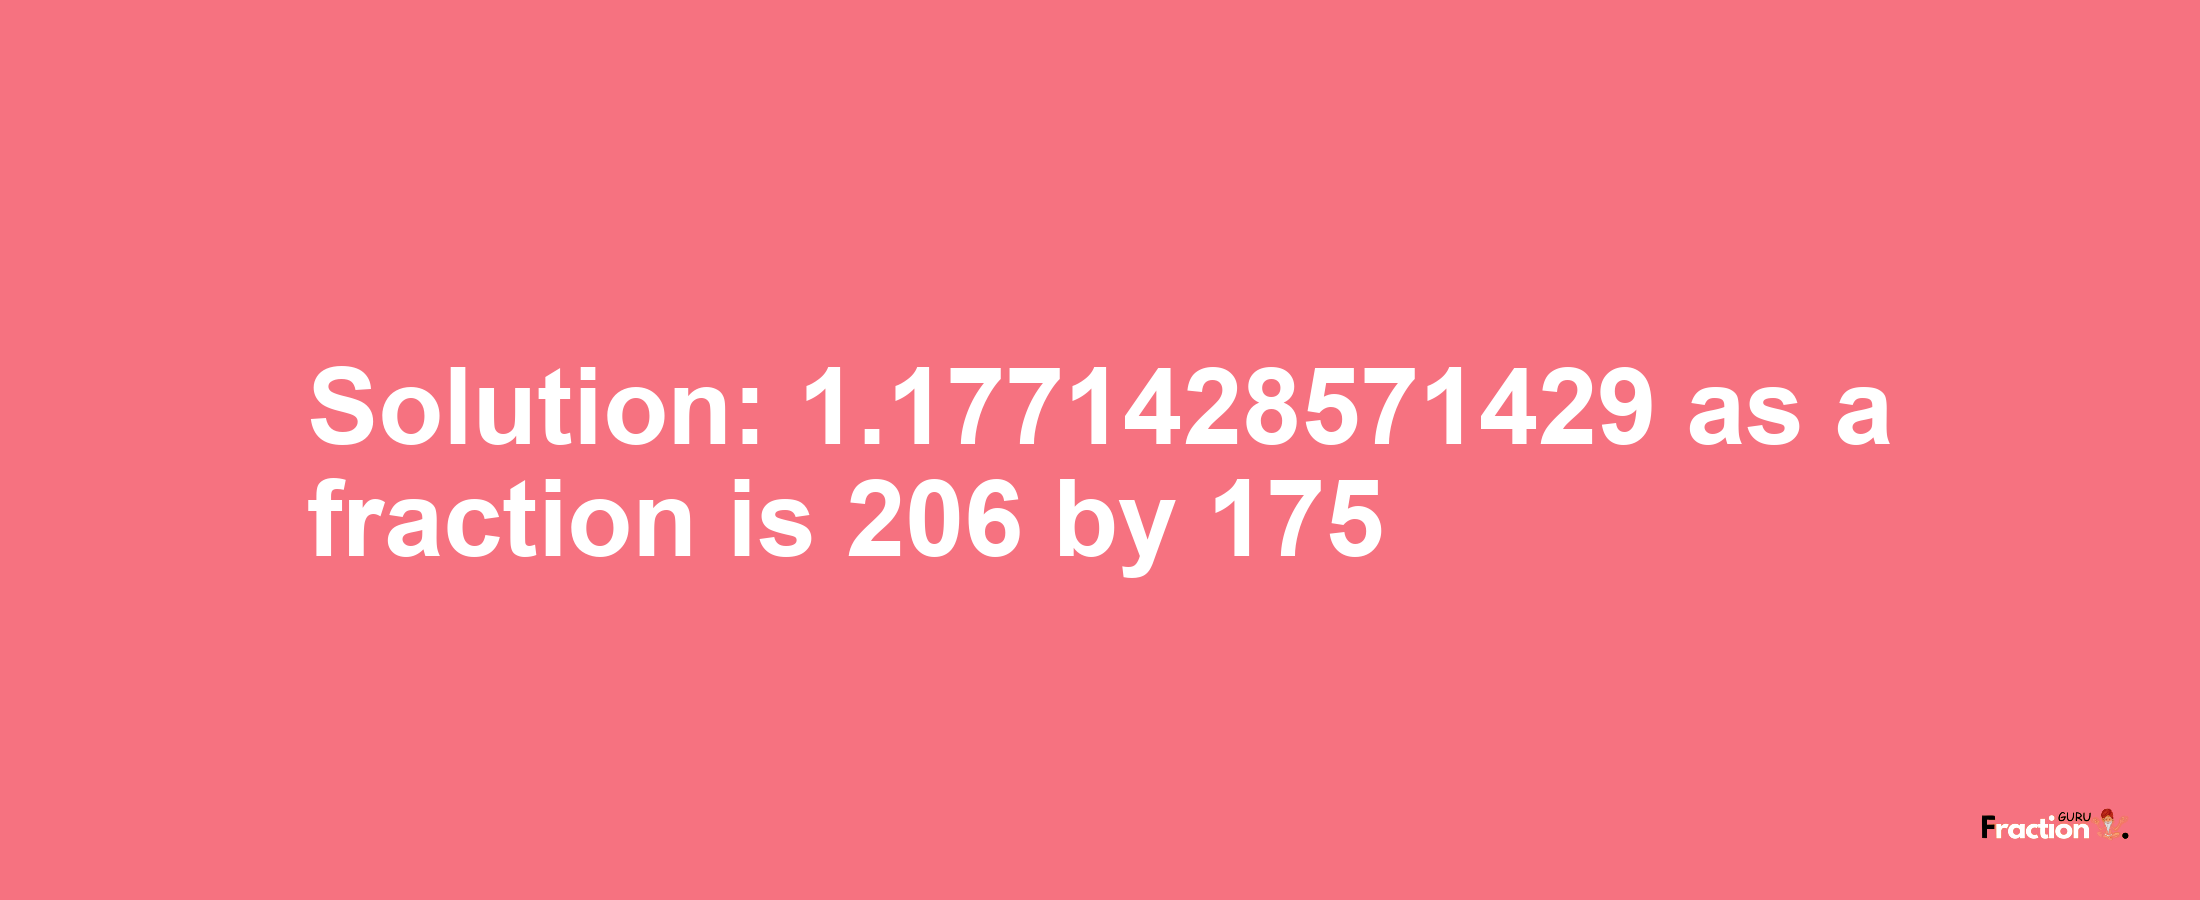 Solution:1.1771428571429 as a fraction is 206/175